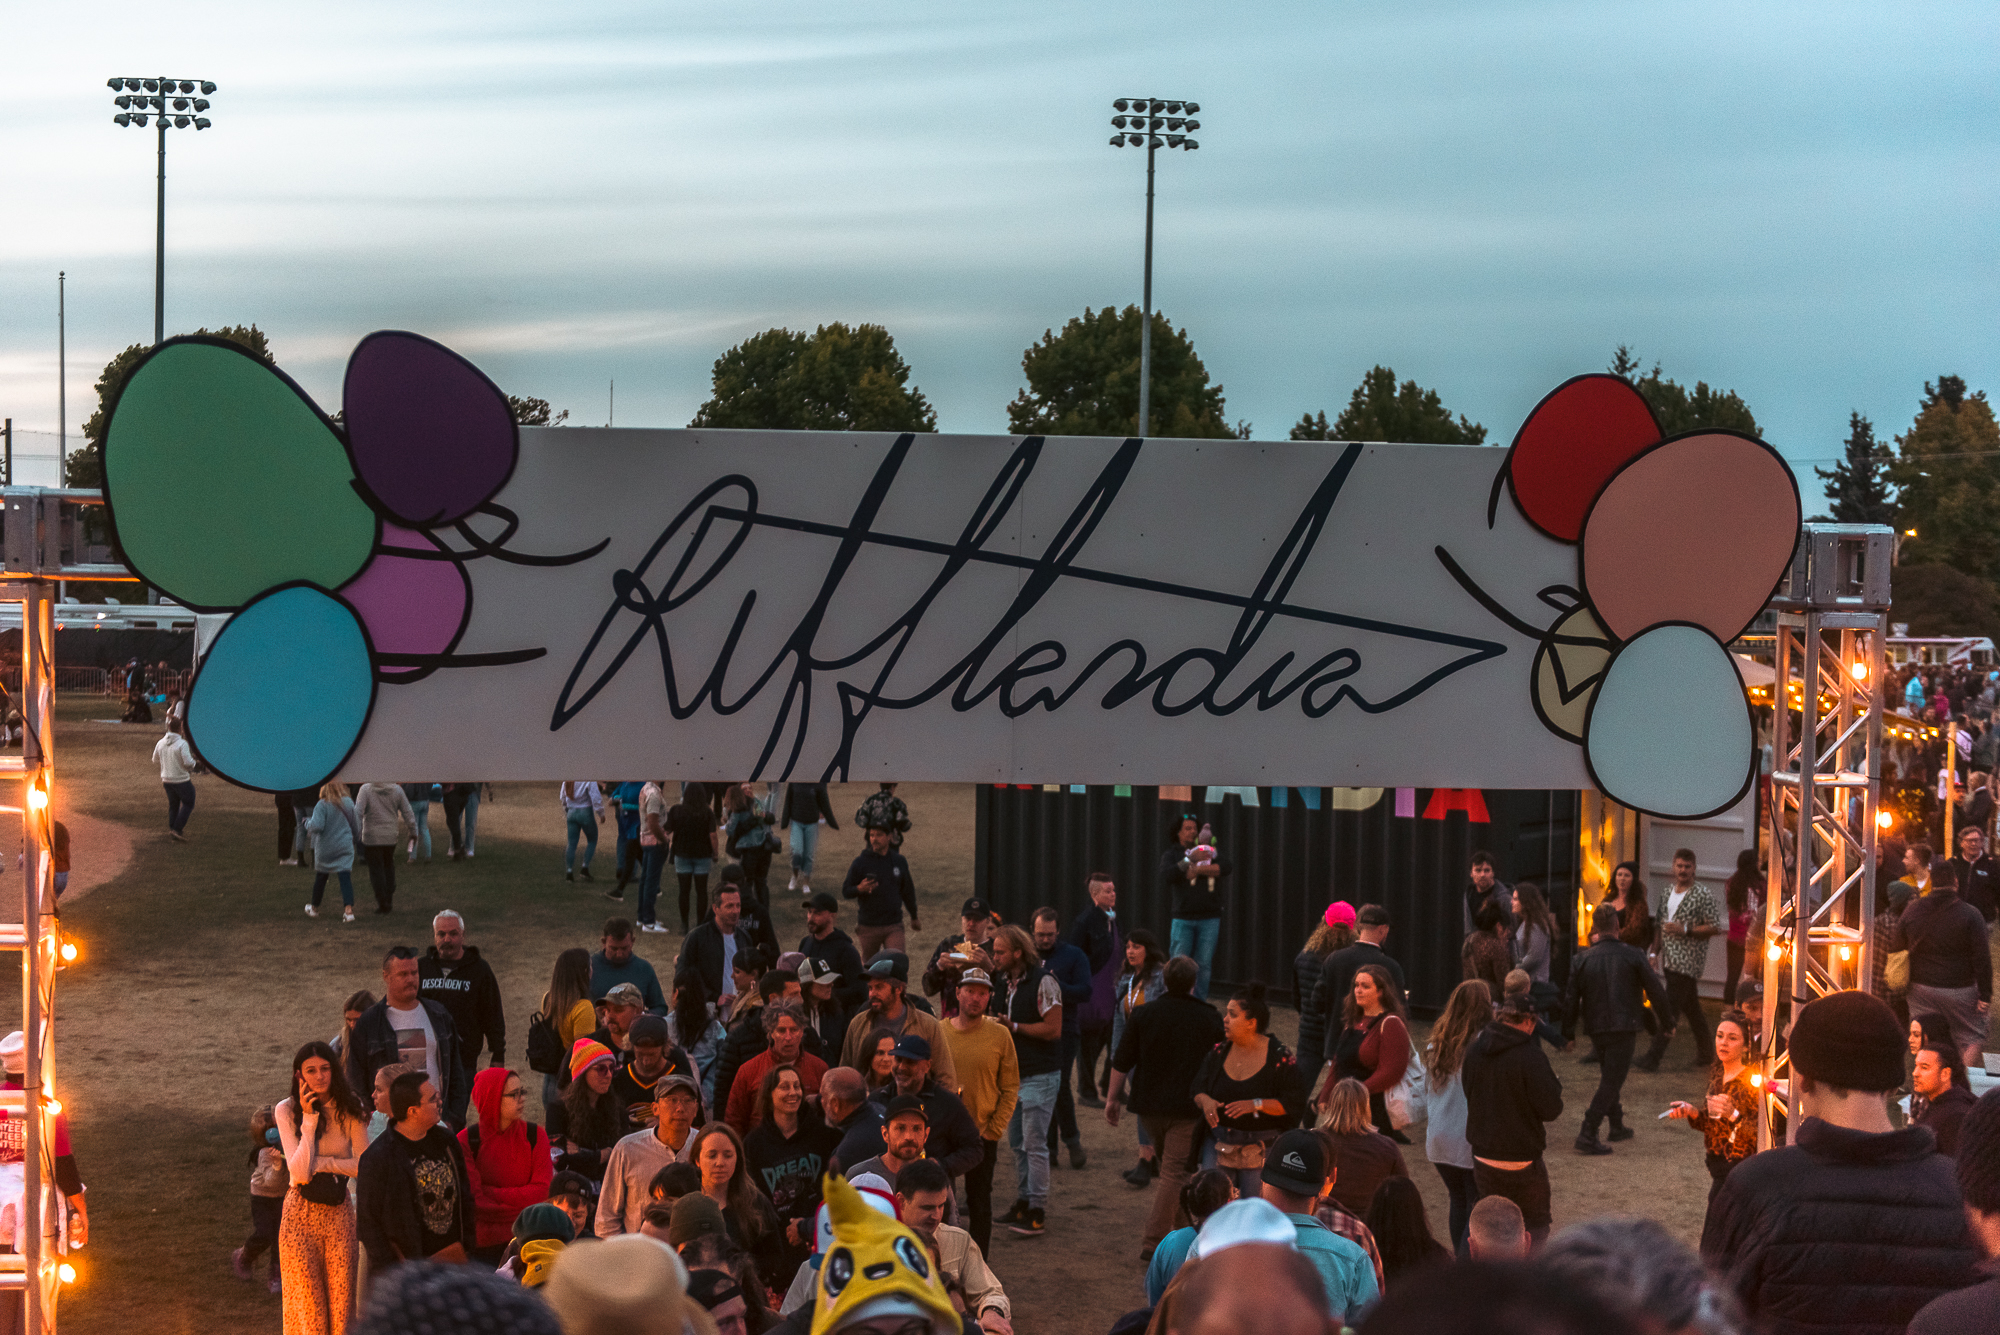 A sign at the entry to the music festival in Victoria, Rifflandia